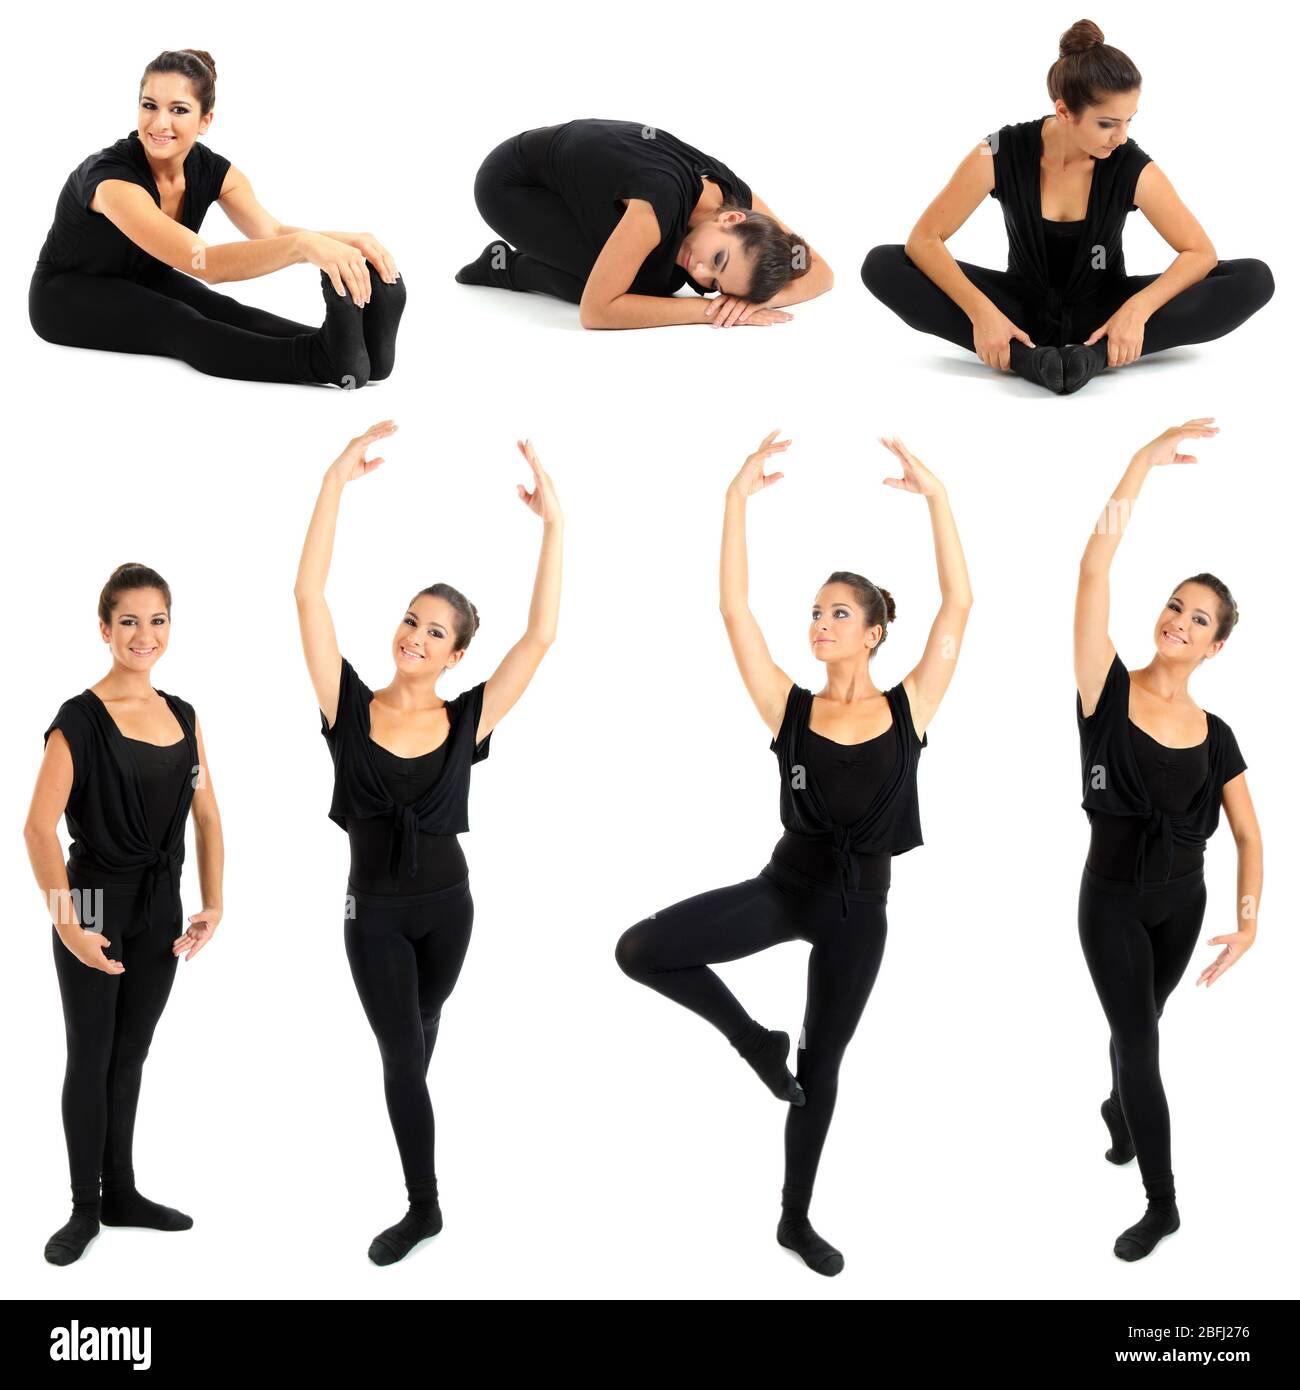 Stretches For Dancers